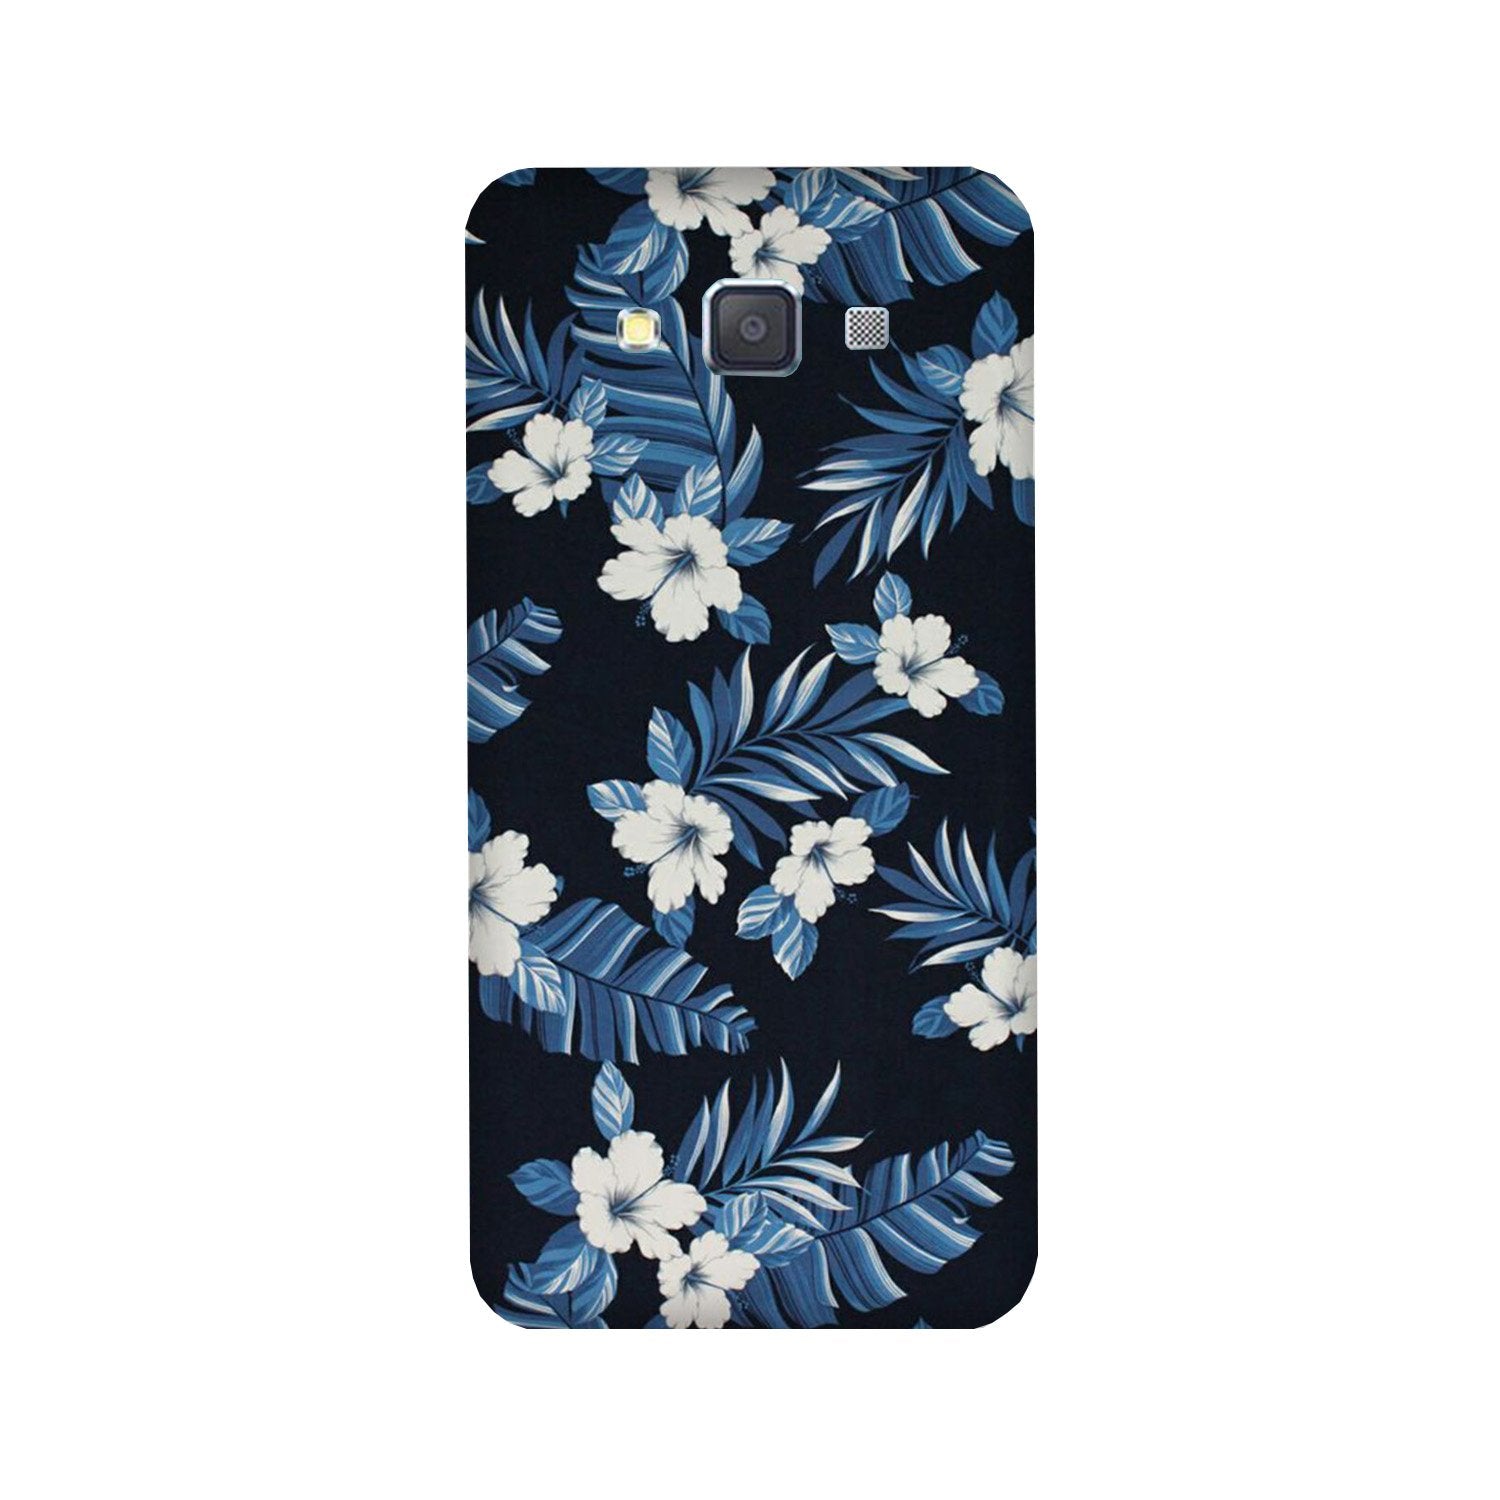 White flowers Blue Background2 Case for Galaxy Grand Max